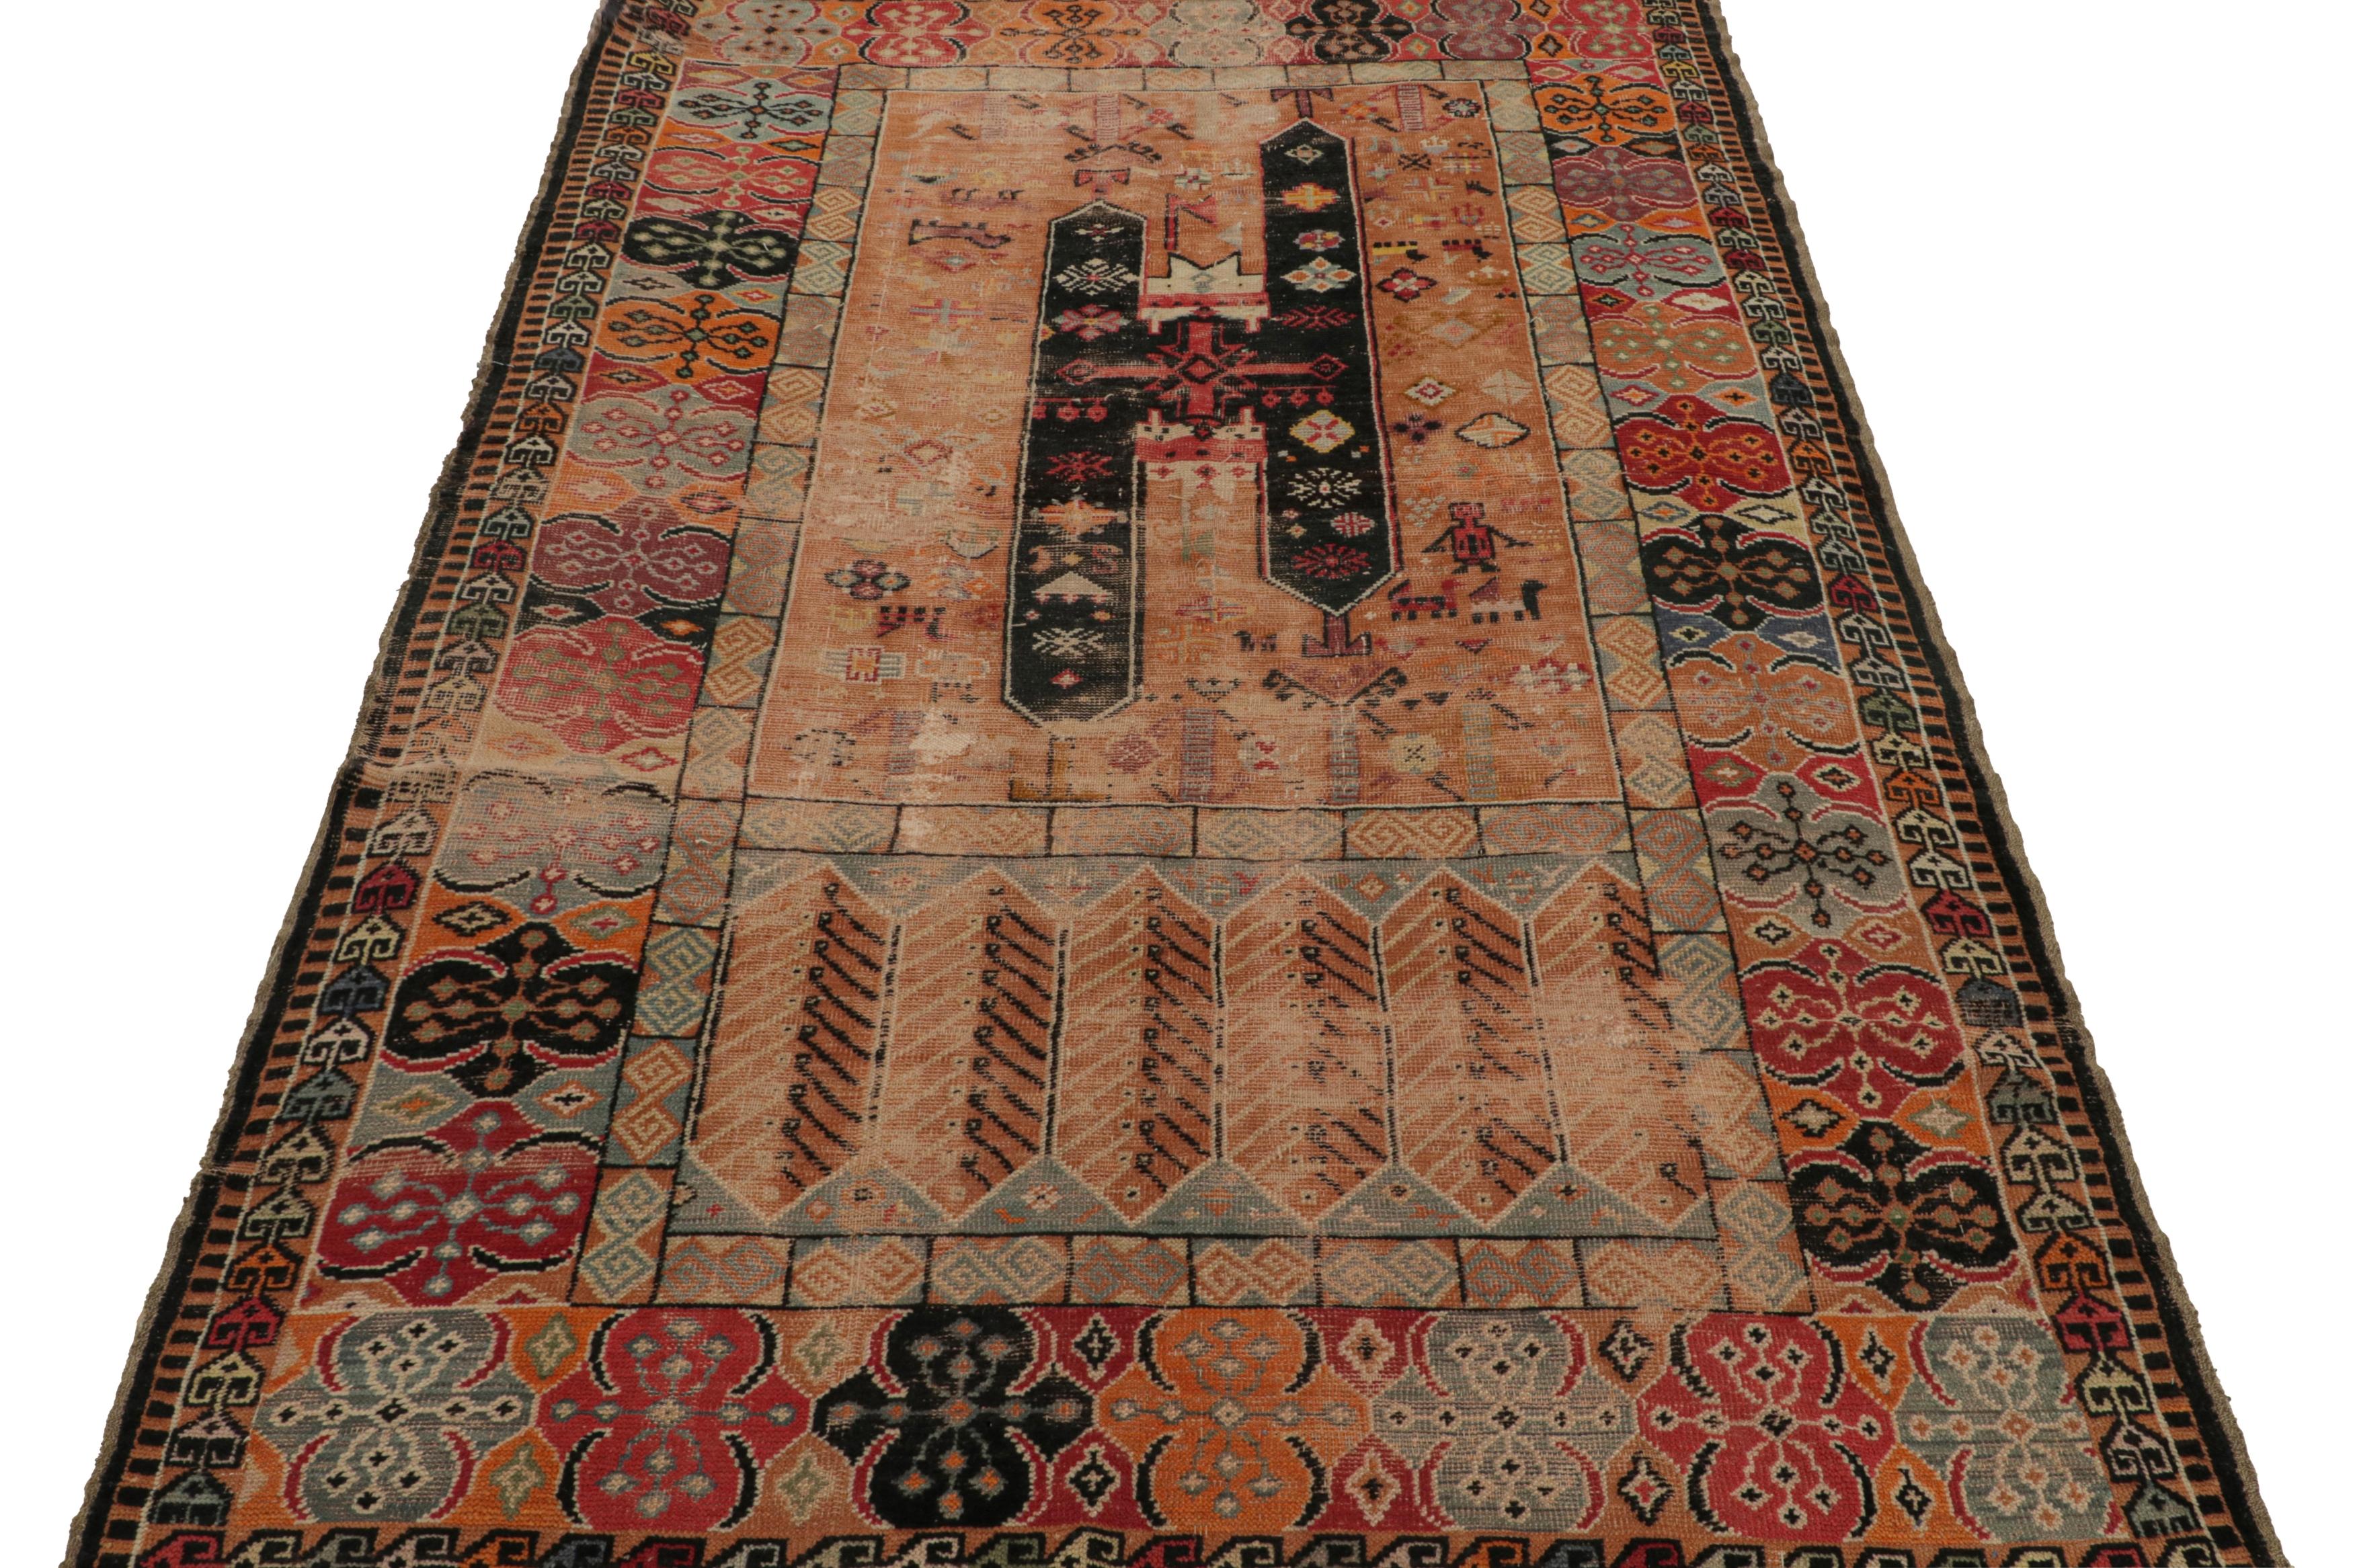 Irish 1890s Antique European Rug with Colorful Geometric Patterns, from Rug & Kilim For Sale